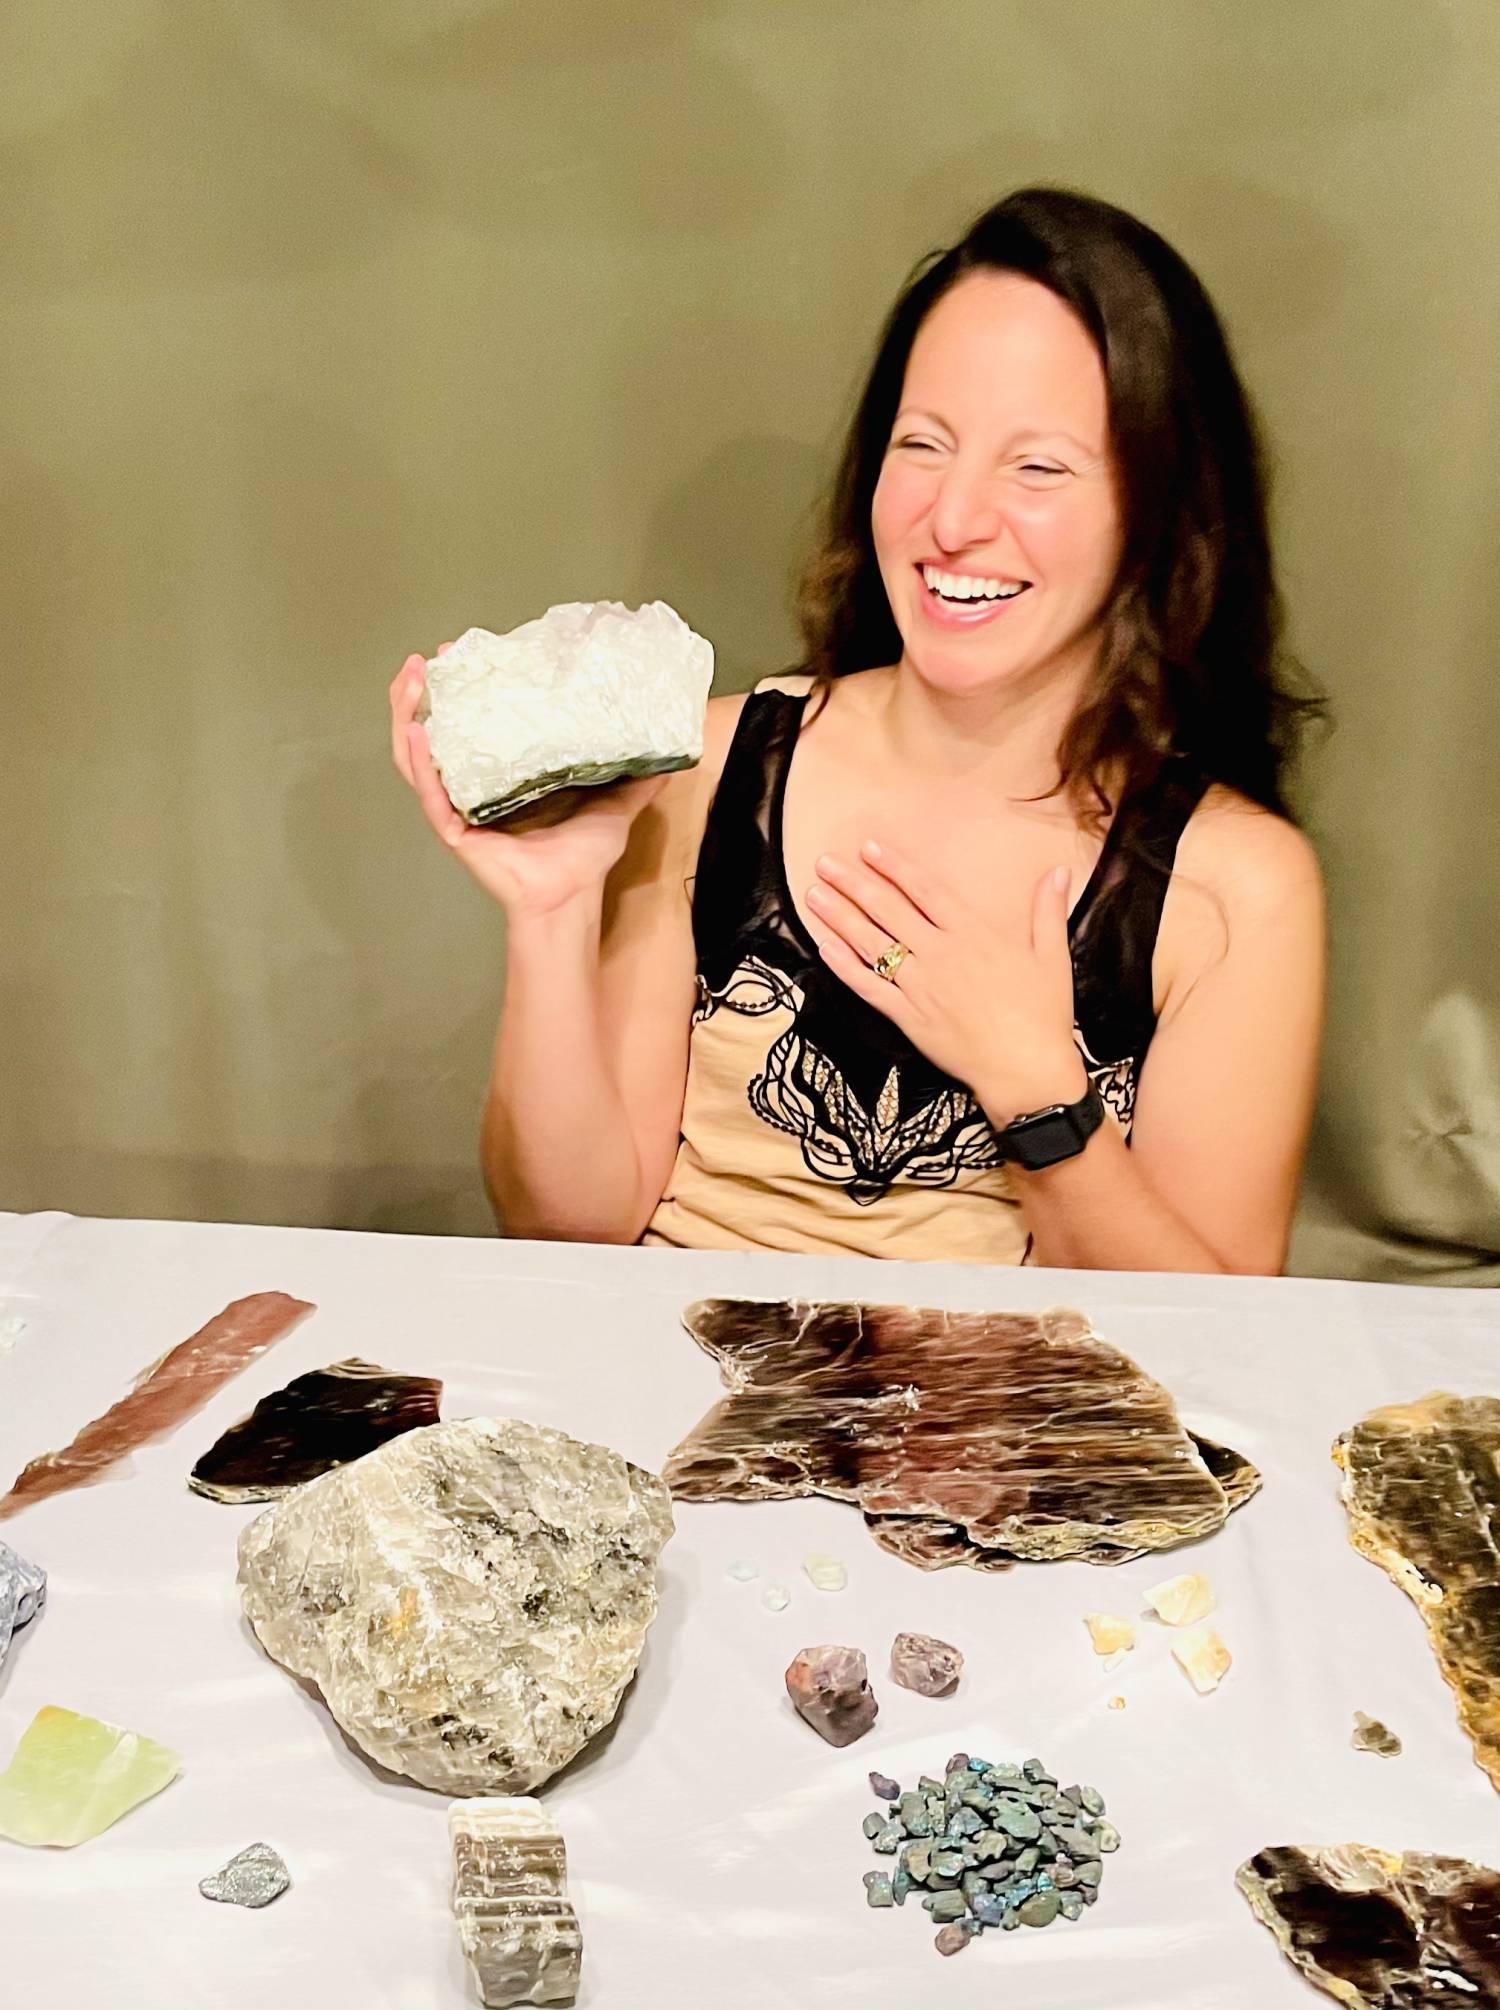 Tammy Campbell sitting at a table with gemstones and minerals, holding a large uncut gem and laughing.